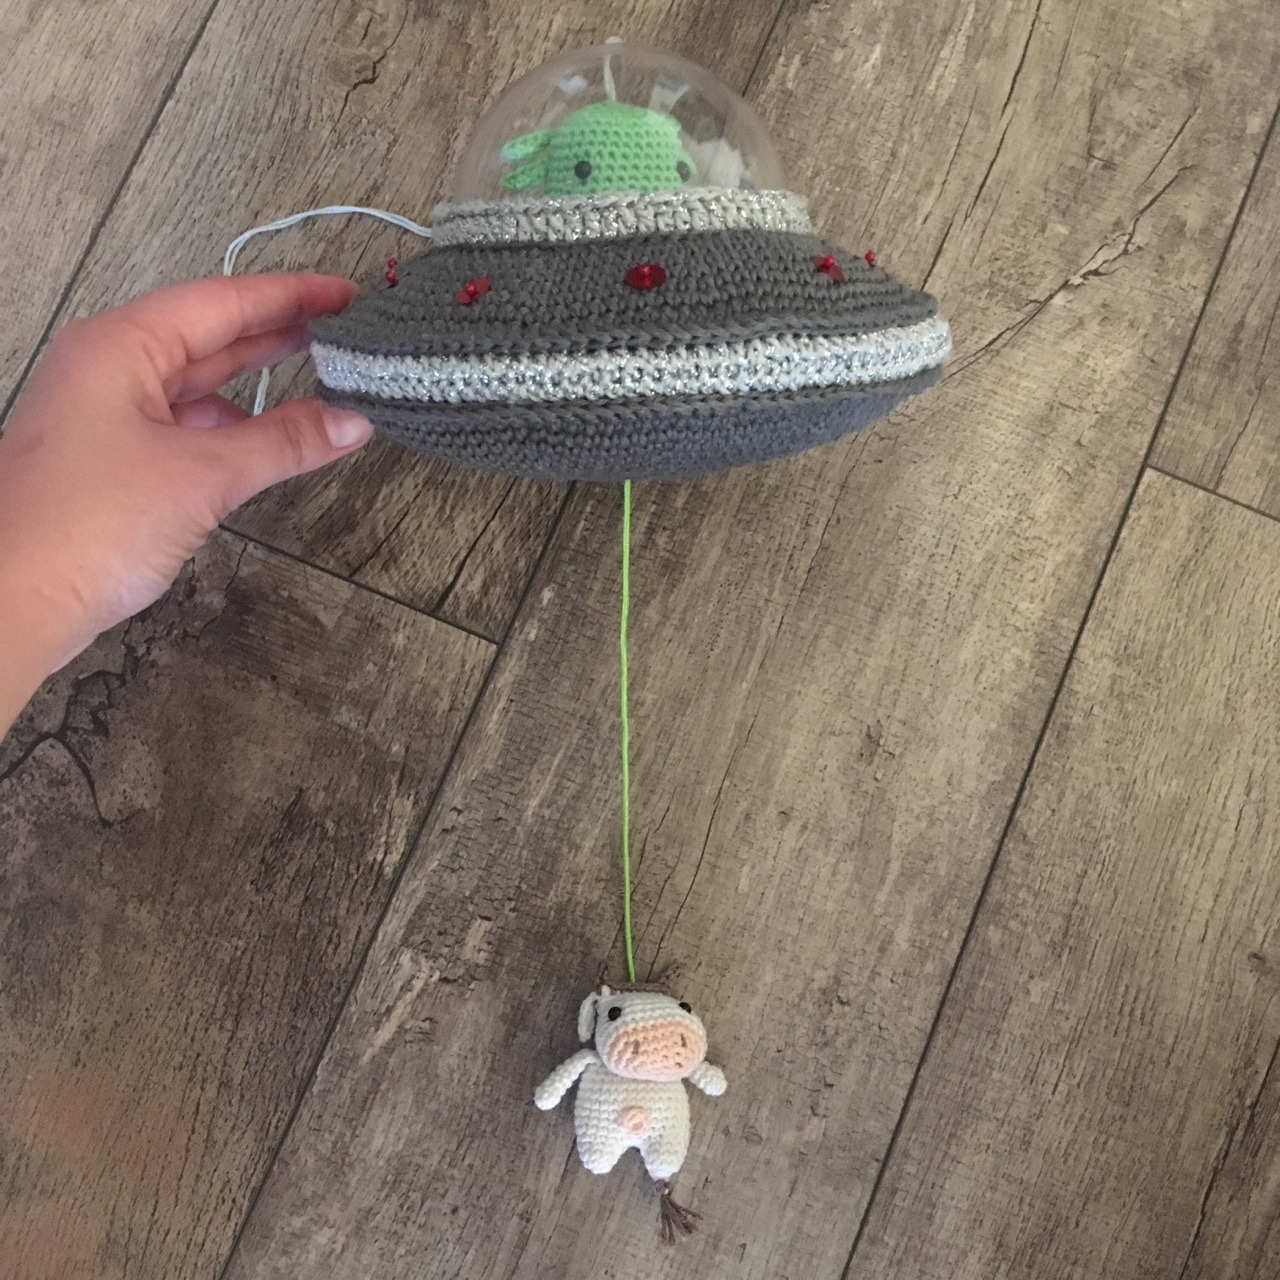 1st-1:tj-crochets:The cow is finally done! This ufo is also a music box; when you pull on the cow, it plays the x-files theme song!